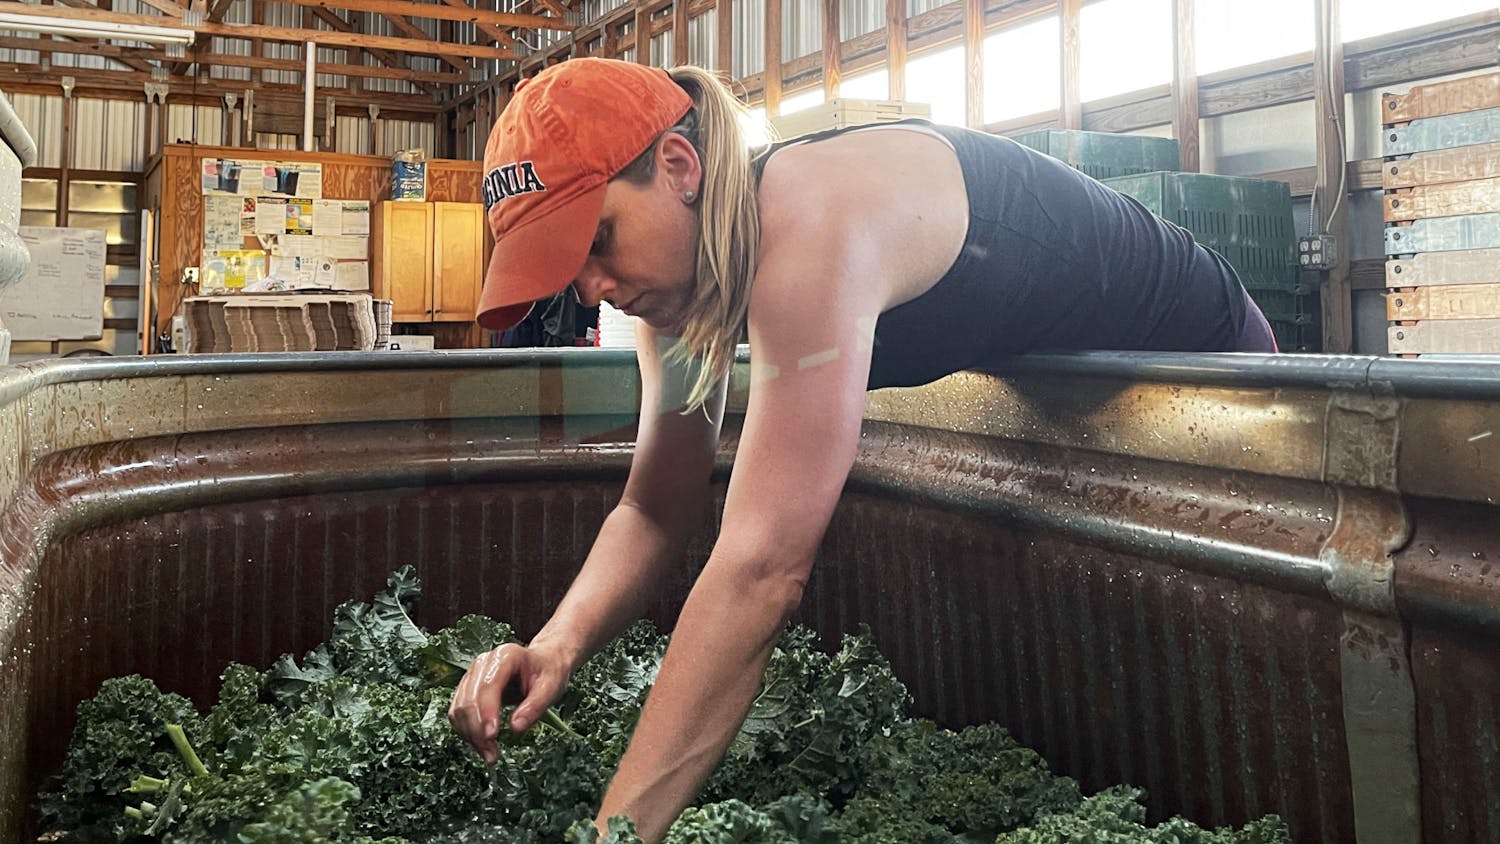 UF professor Hannah Mathews, 43, washes kale after volunteering to help harvest vegetables at Siembra Farm in Gainesville on Tuesday, May 4, 2021. She was among many volunteers who worked to harvest extra vegetables to give to local families in East Gainesville. (Photo by Joelle Wittig)
